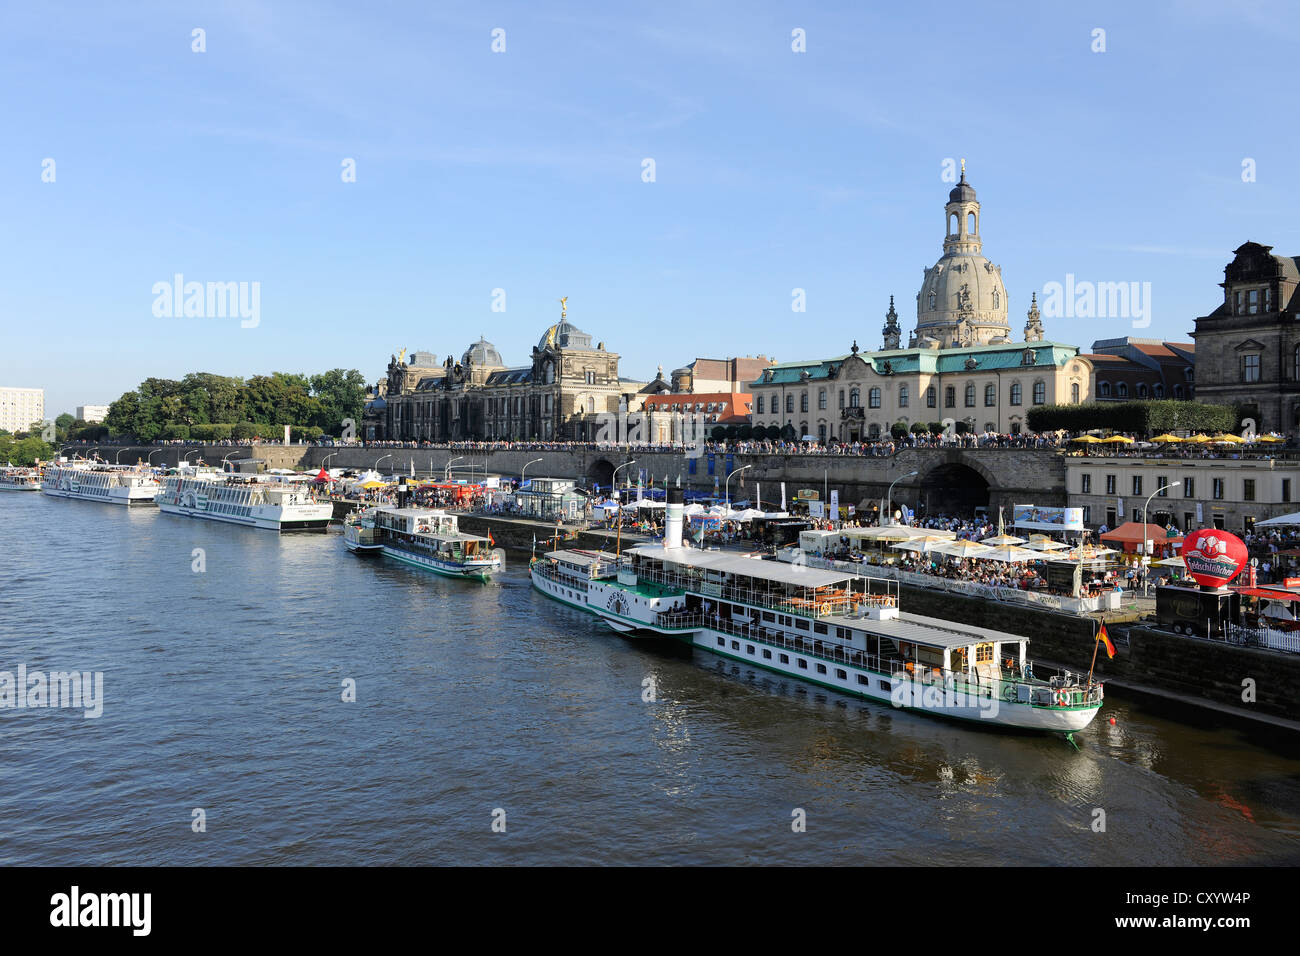 Dresden City Festival, Terrassenufer waterfront and Bruehl's Terrace, Elbe River and boats, Frauenkirche church at the back Stock Photo